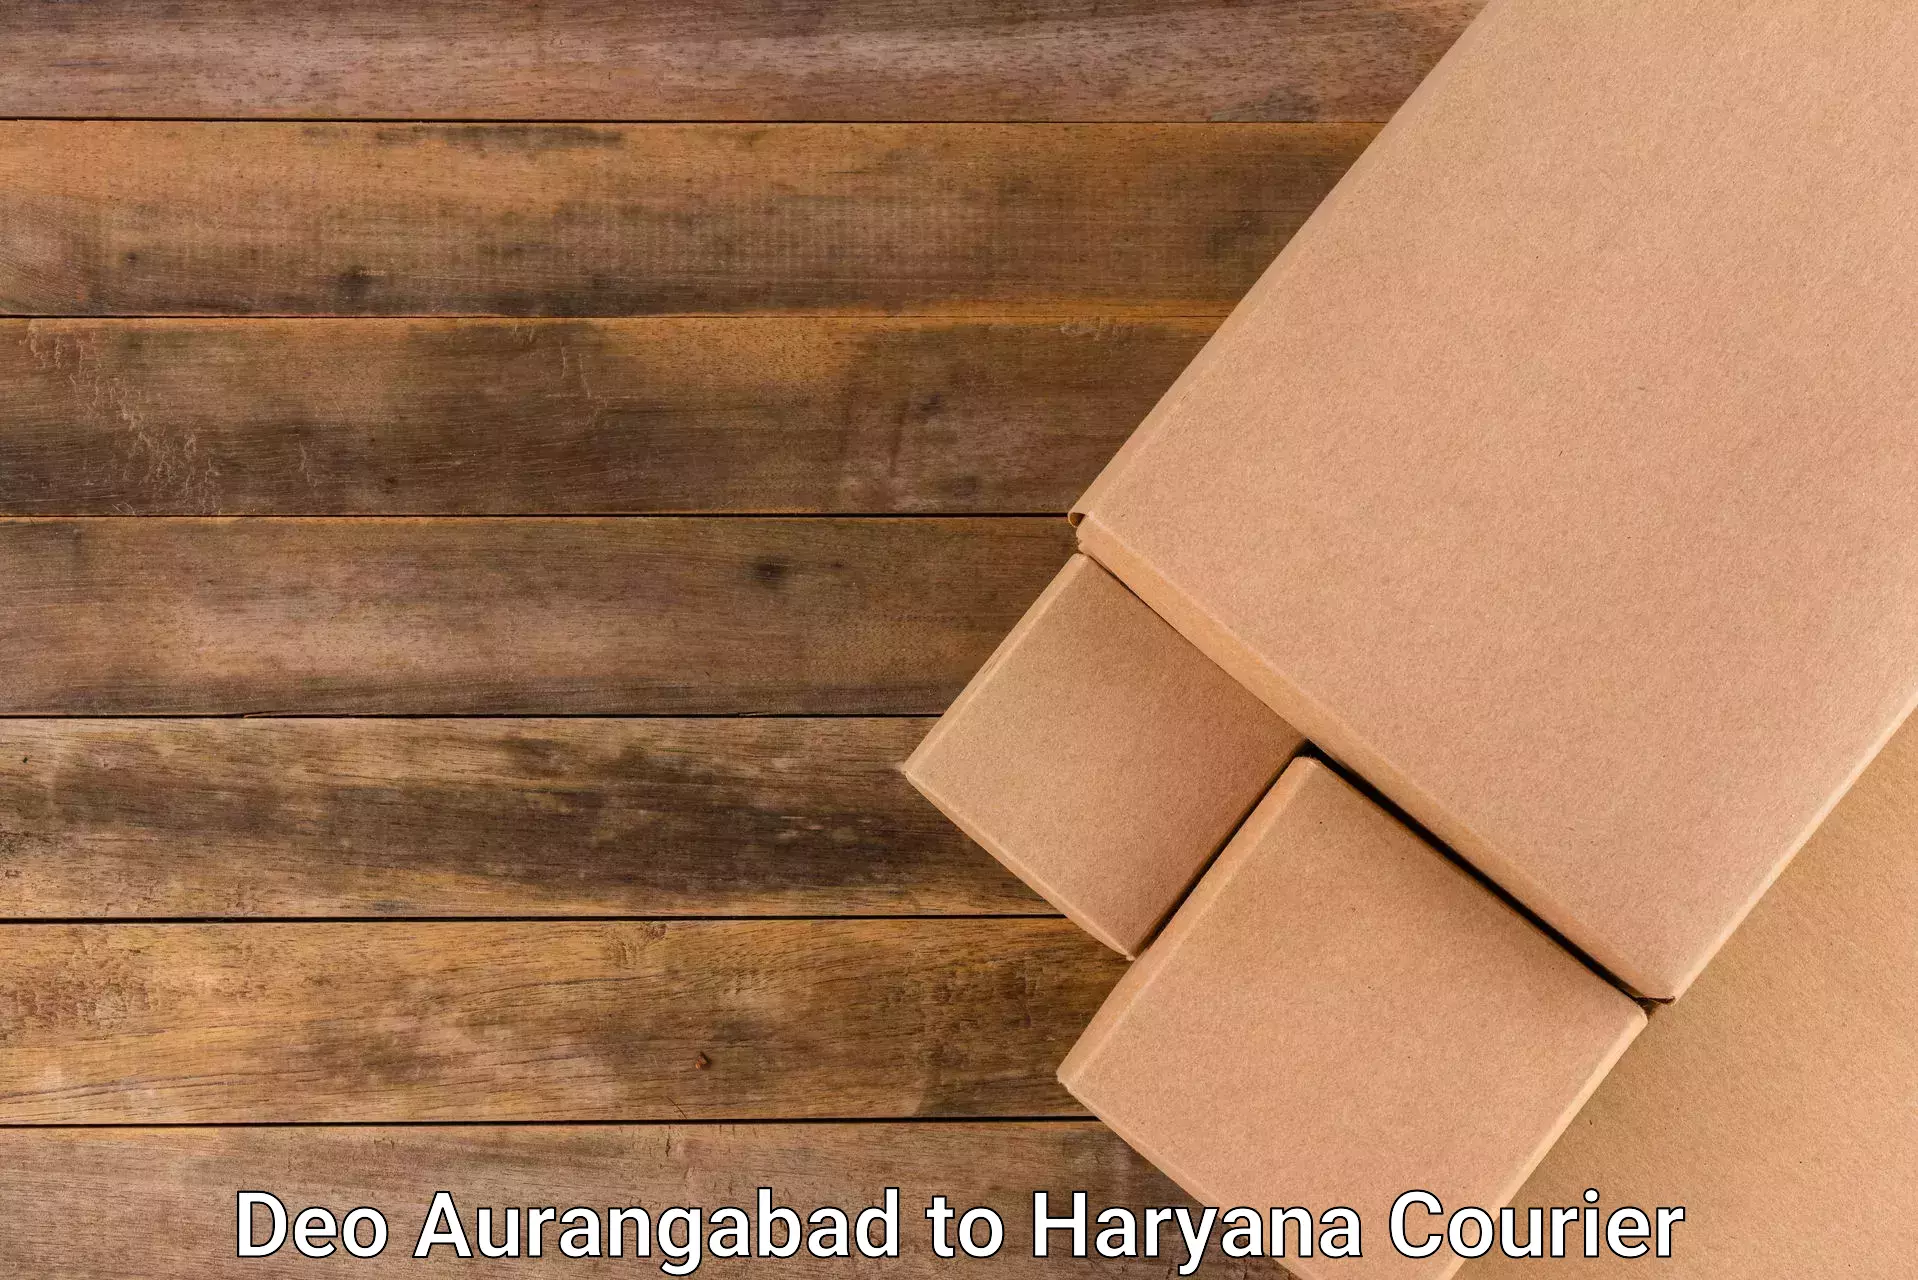 Sustainable shipping practices Deo Aurangabad to Haryana